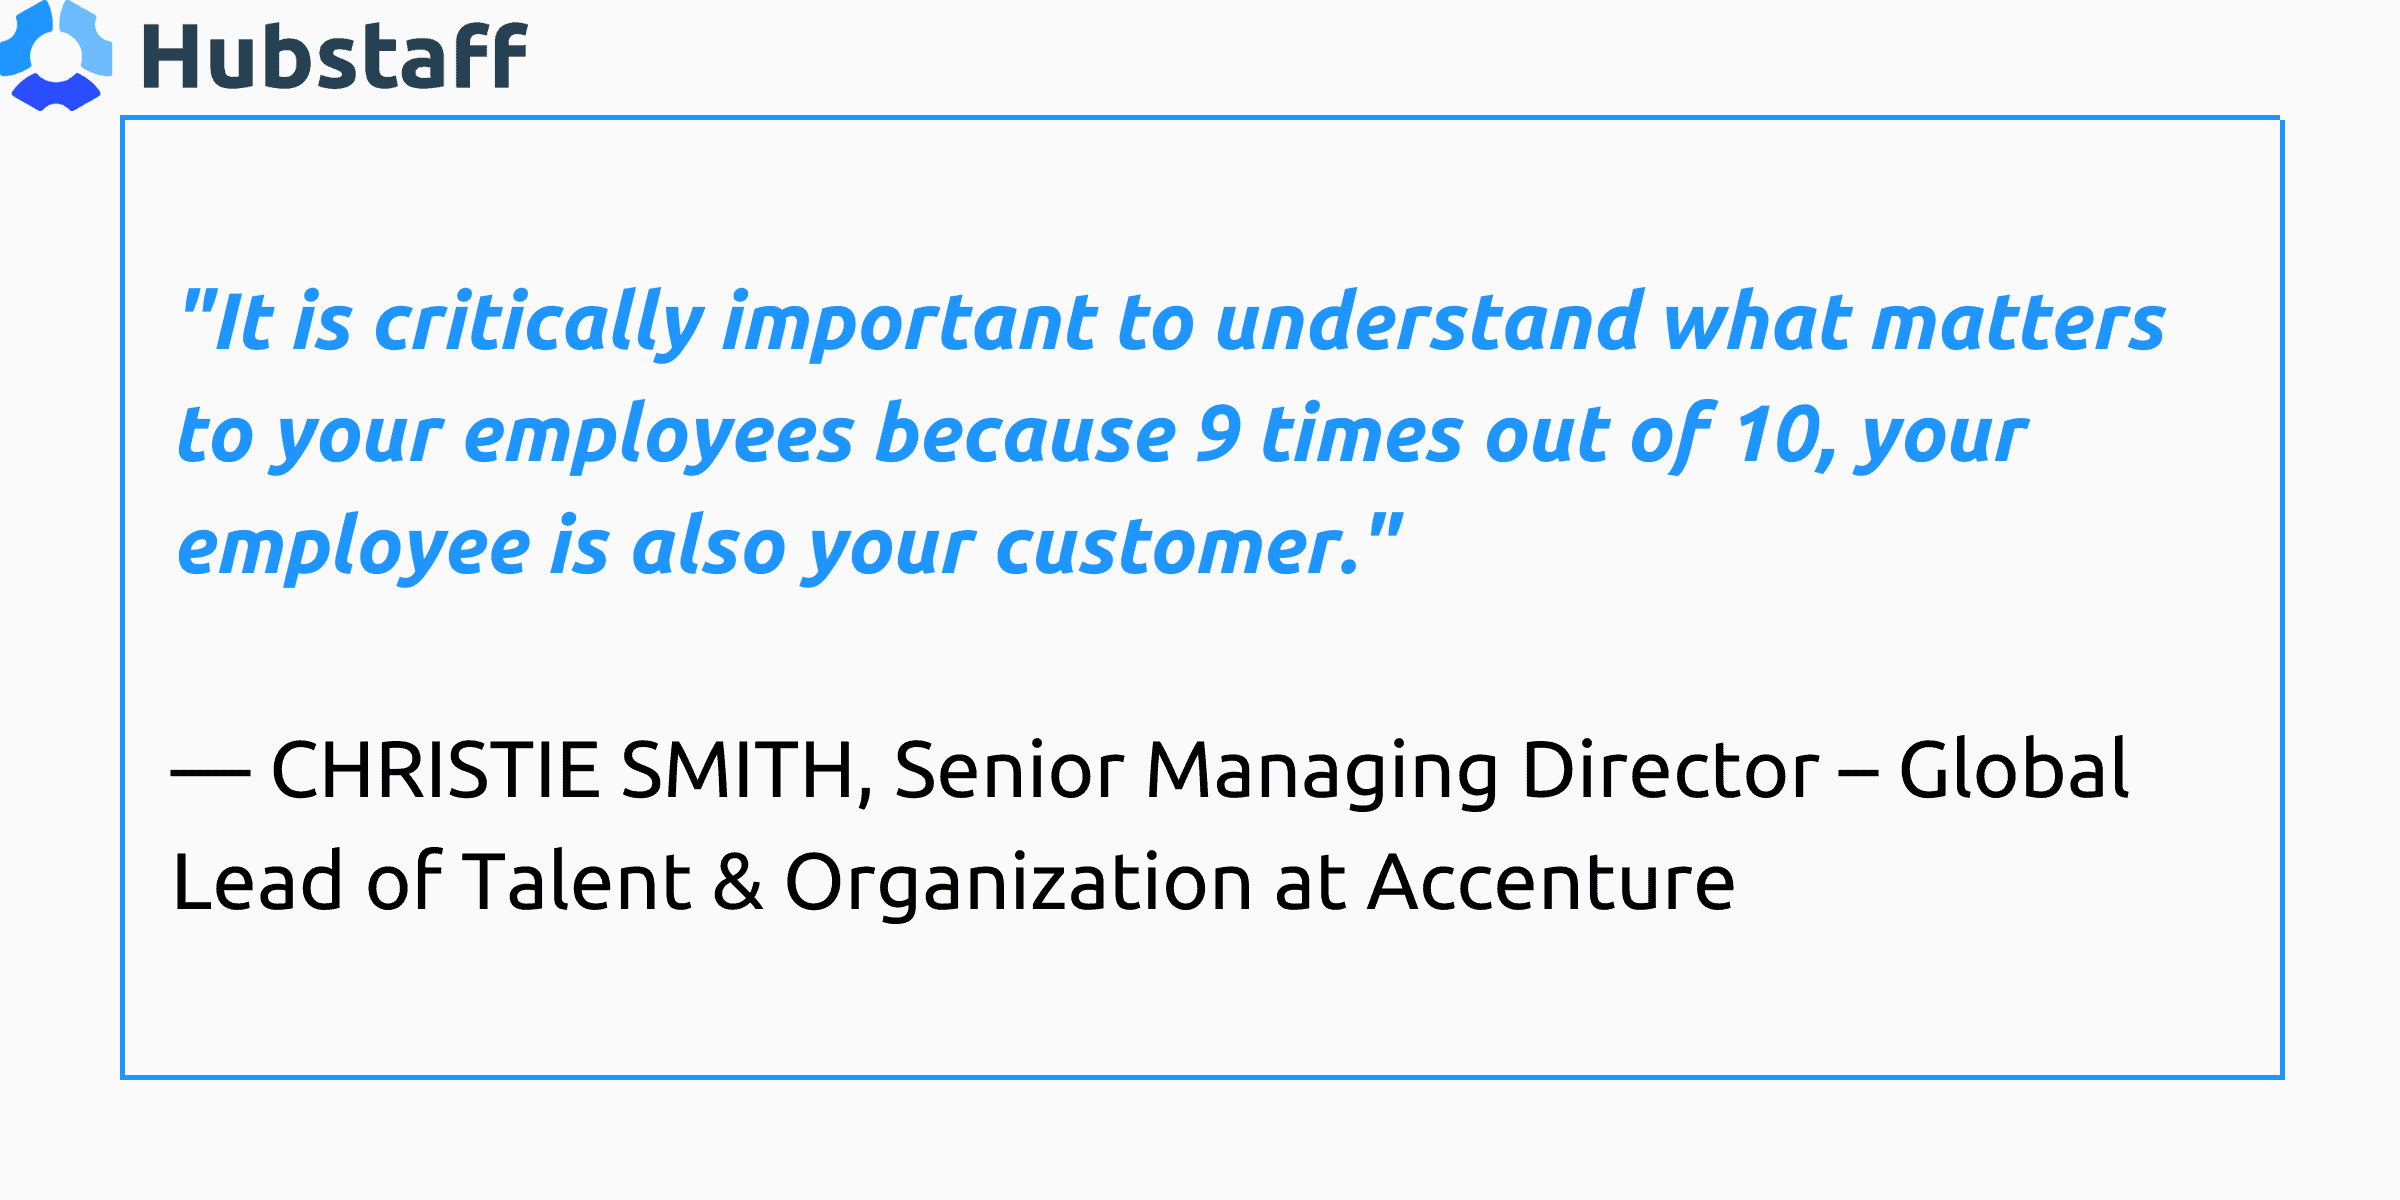 "It is critically important to understand what matters to your employees because 9 times out of 10, your employee is also your customer." – Christie Smith, Accenture